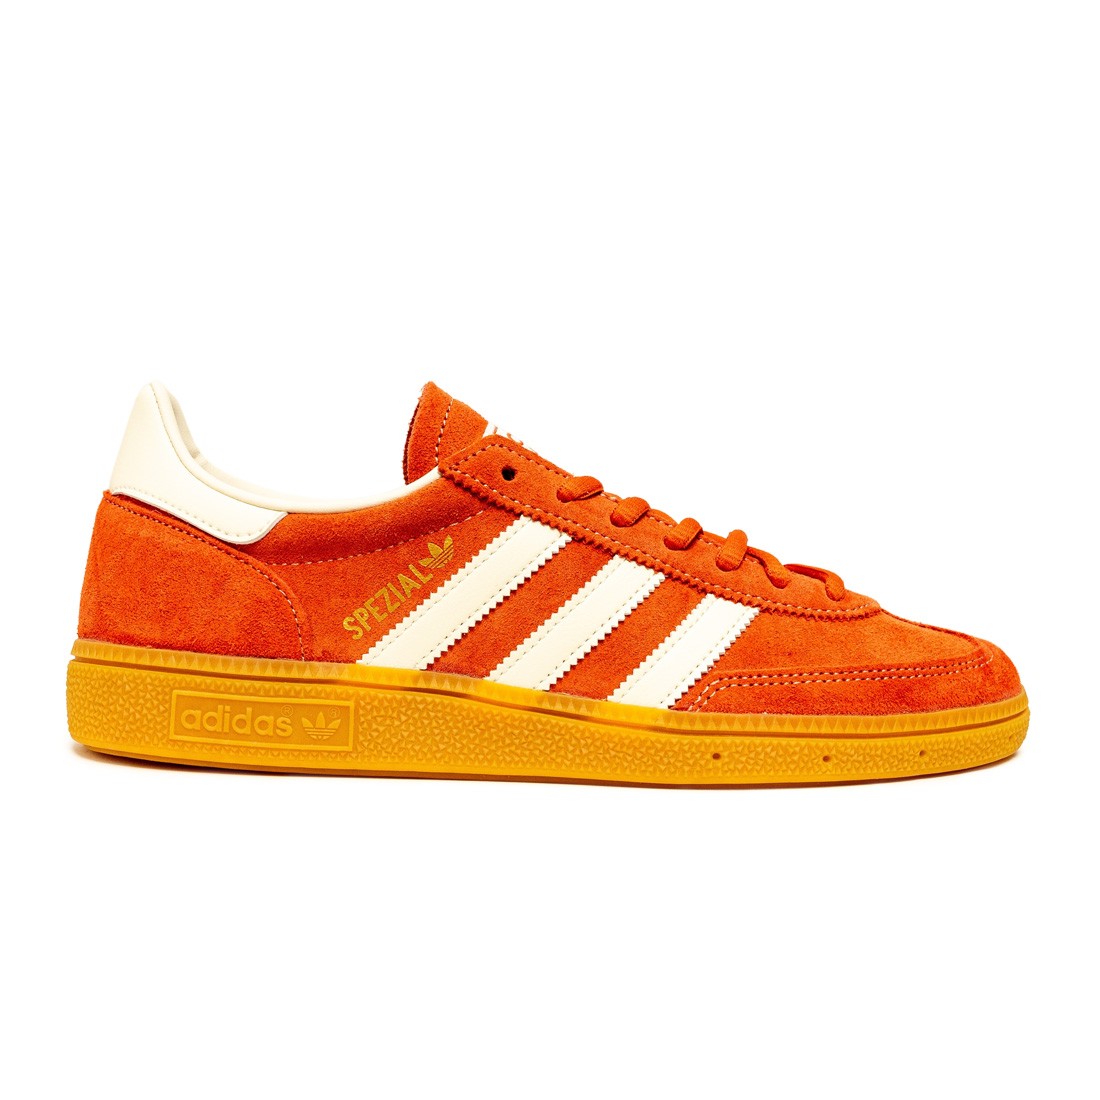 adidas spezial m nchen brown highlights today